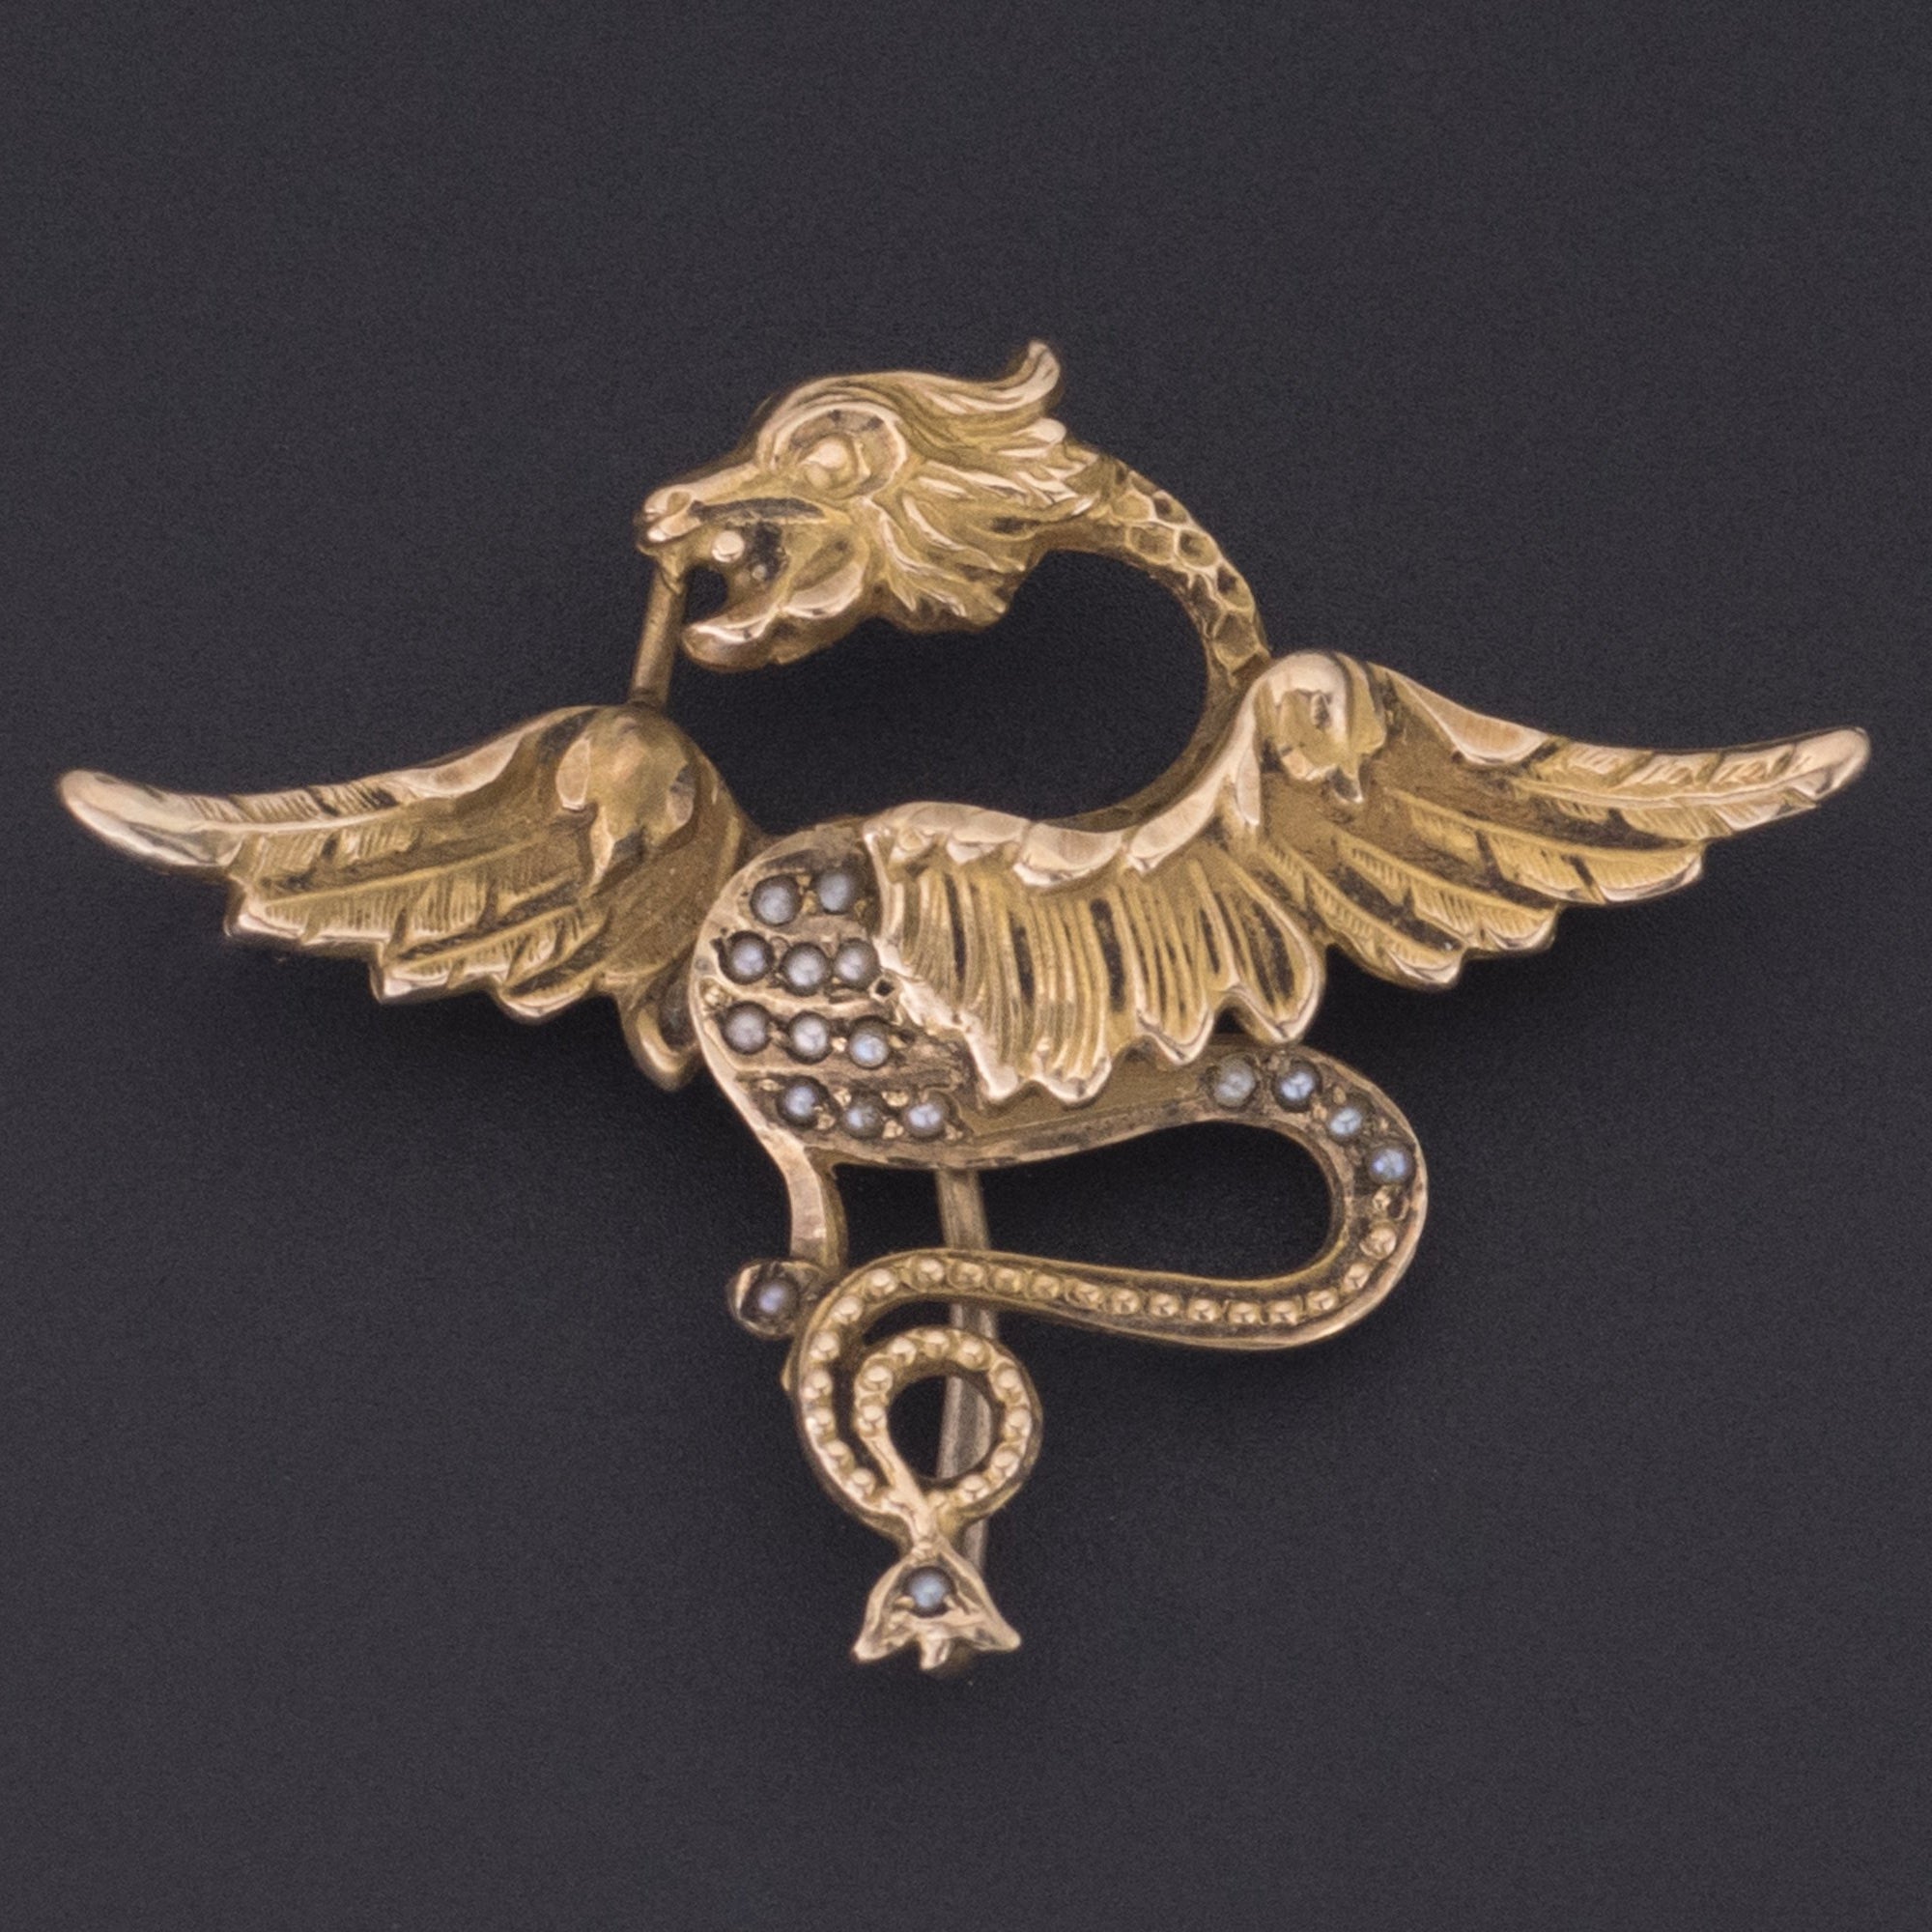 Antique Griffin Brooch or Watch Pin | 10k Gold Griffin | Antique Griffin Brooch | Antique Brooch